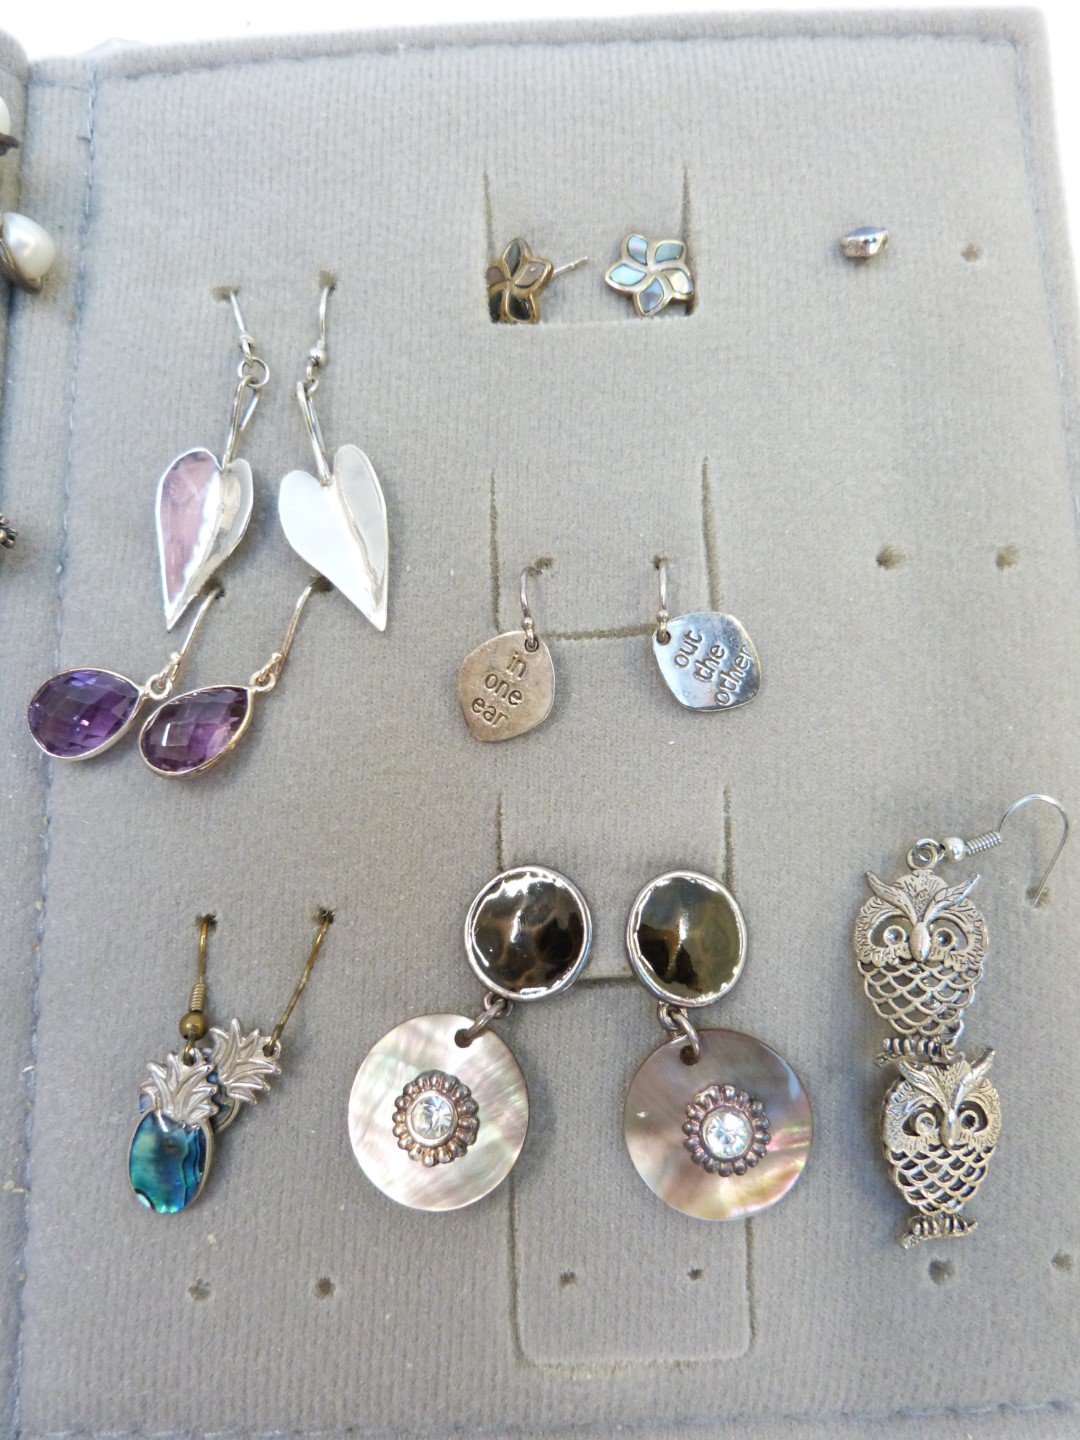 A collection of silver jewellery including earrings, rings, bracelets, pendants, charms etc - Image 4 of 4